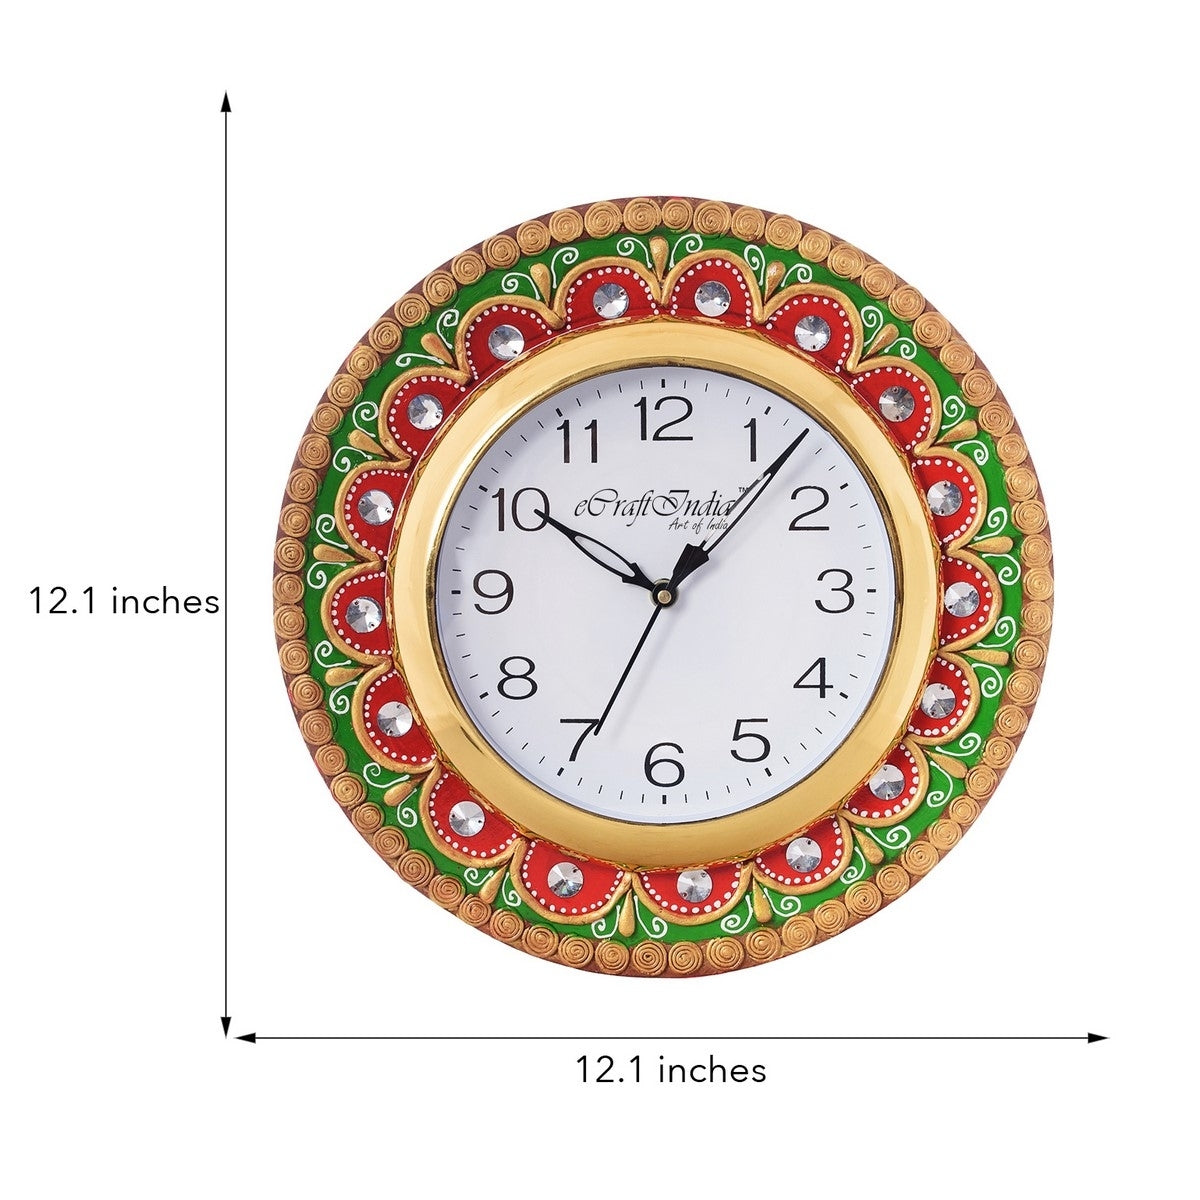 Crystal Studded Embellish Papier-Mache Wooden Handcrafted Wall Clock 2